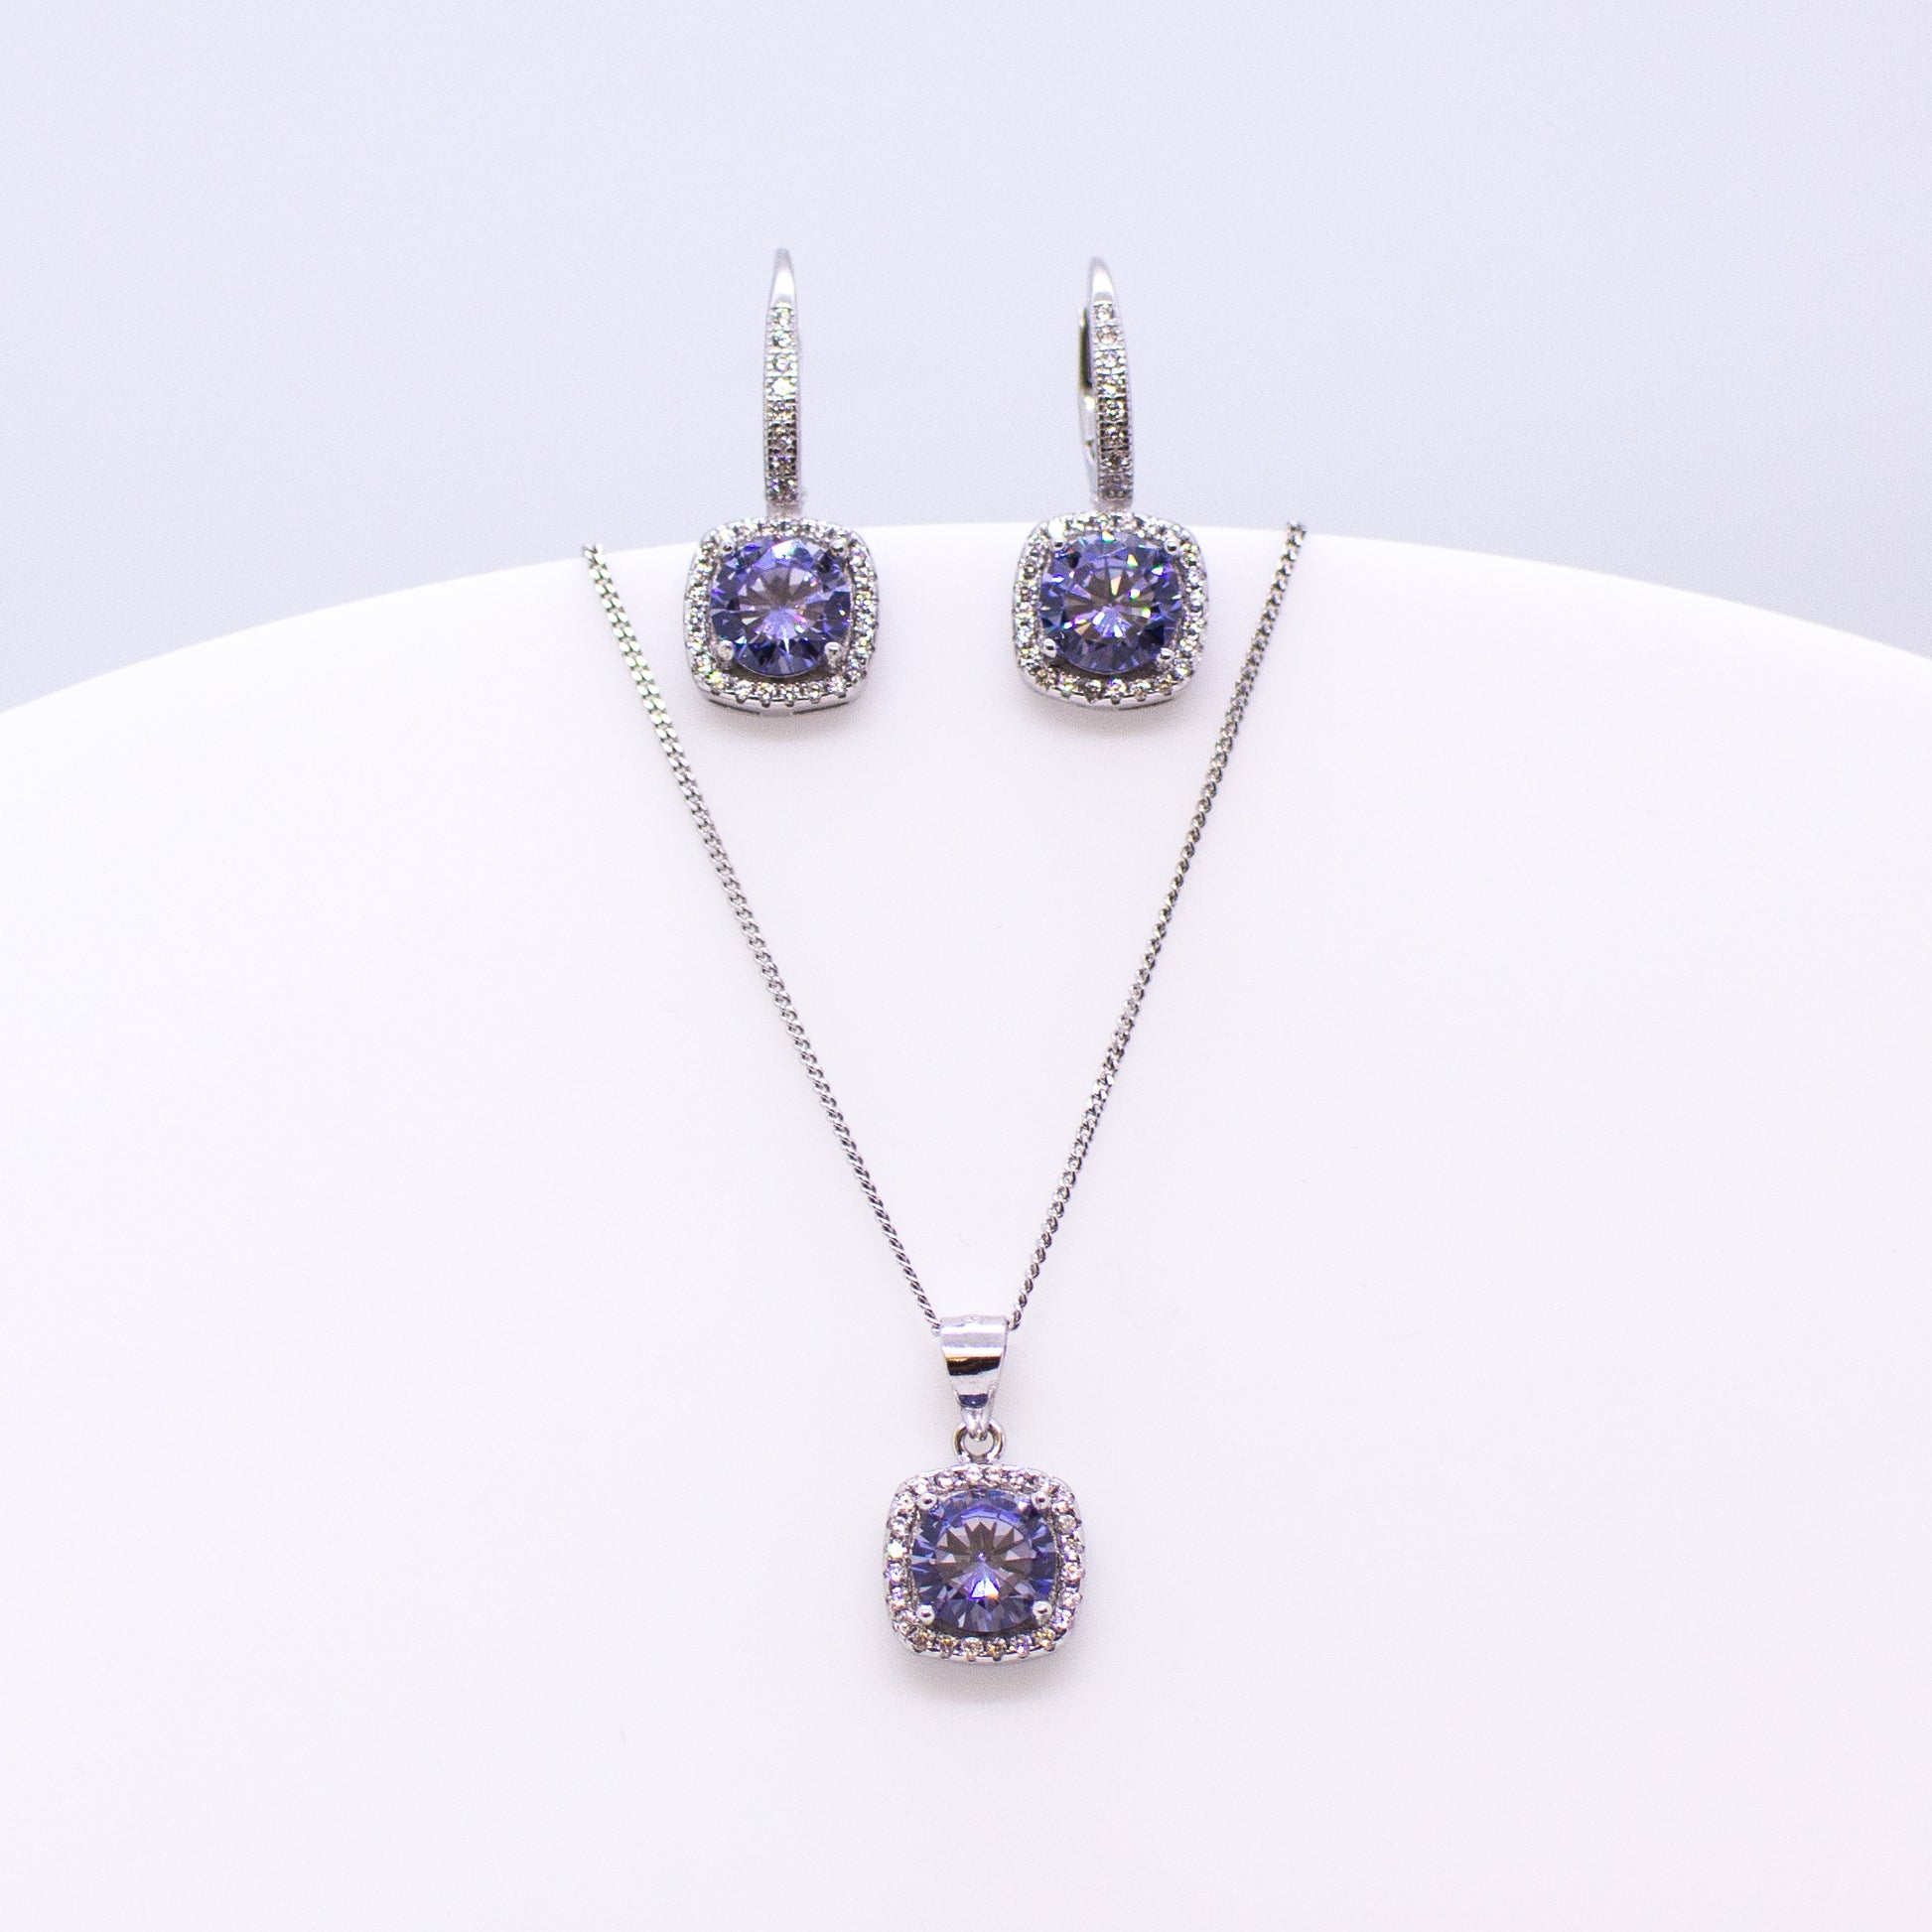 These sterling silver cushion shaped drop earrings set with glittering cubic zirconia stones in created Tanzanite colour and white accompanied by the matching necklace are the perfect addition to any outfit. Product details: Product materials: 925 sterling silver, cubic zirconia Chain length: 44cm inch fine diamond cut curb chain Pendant dimensions:  18mm L x 10mm W Earring dimensions:  22mm L x 10mm W Drop earrings with integrated CZ set German wires.